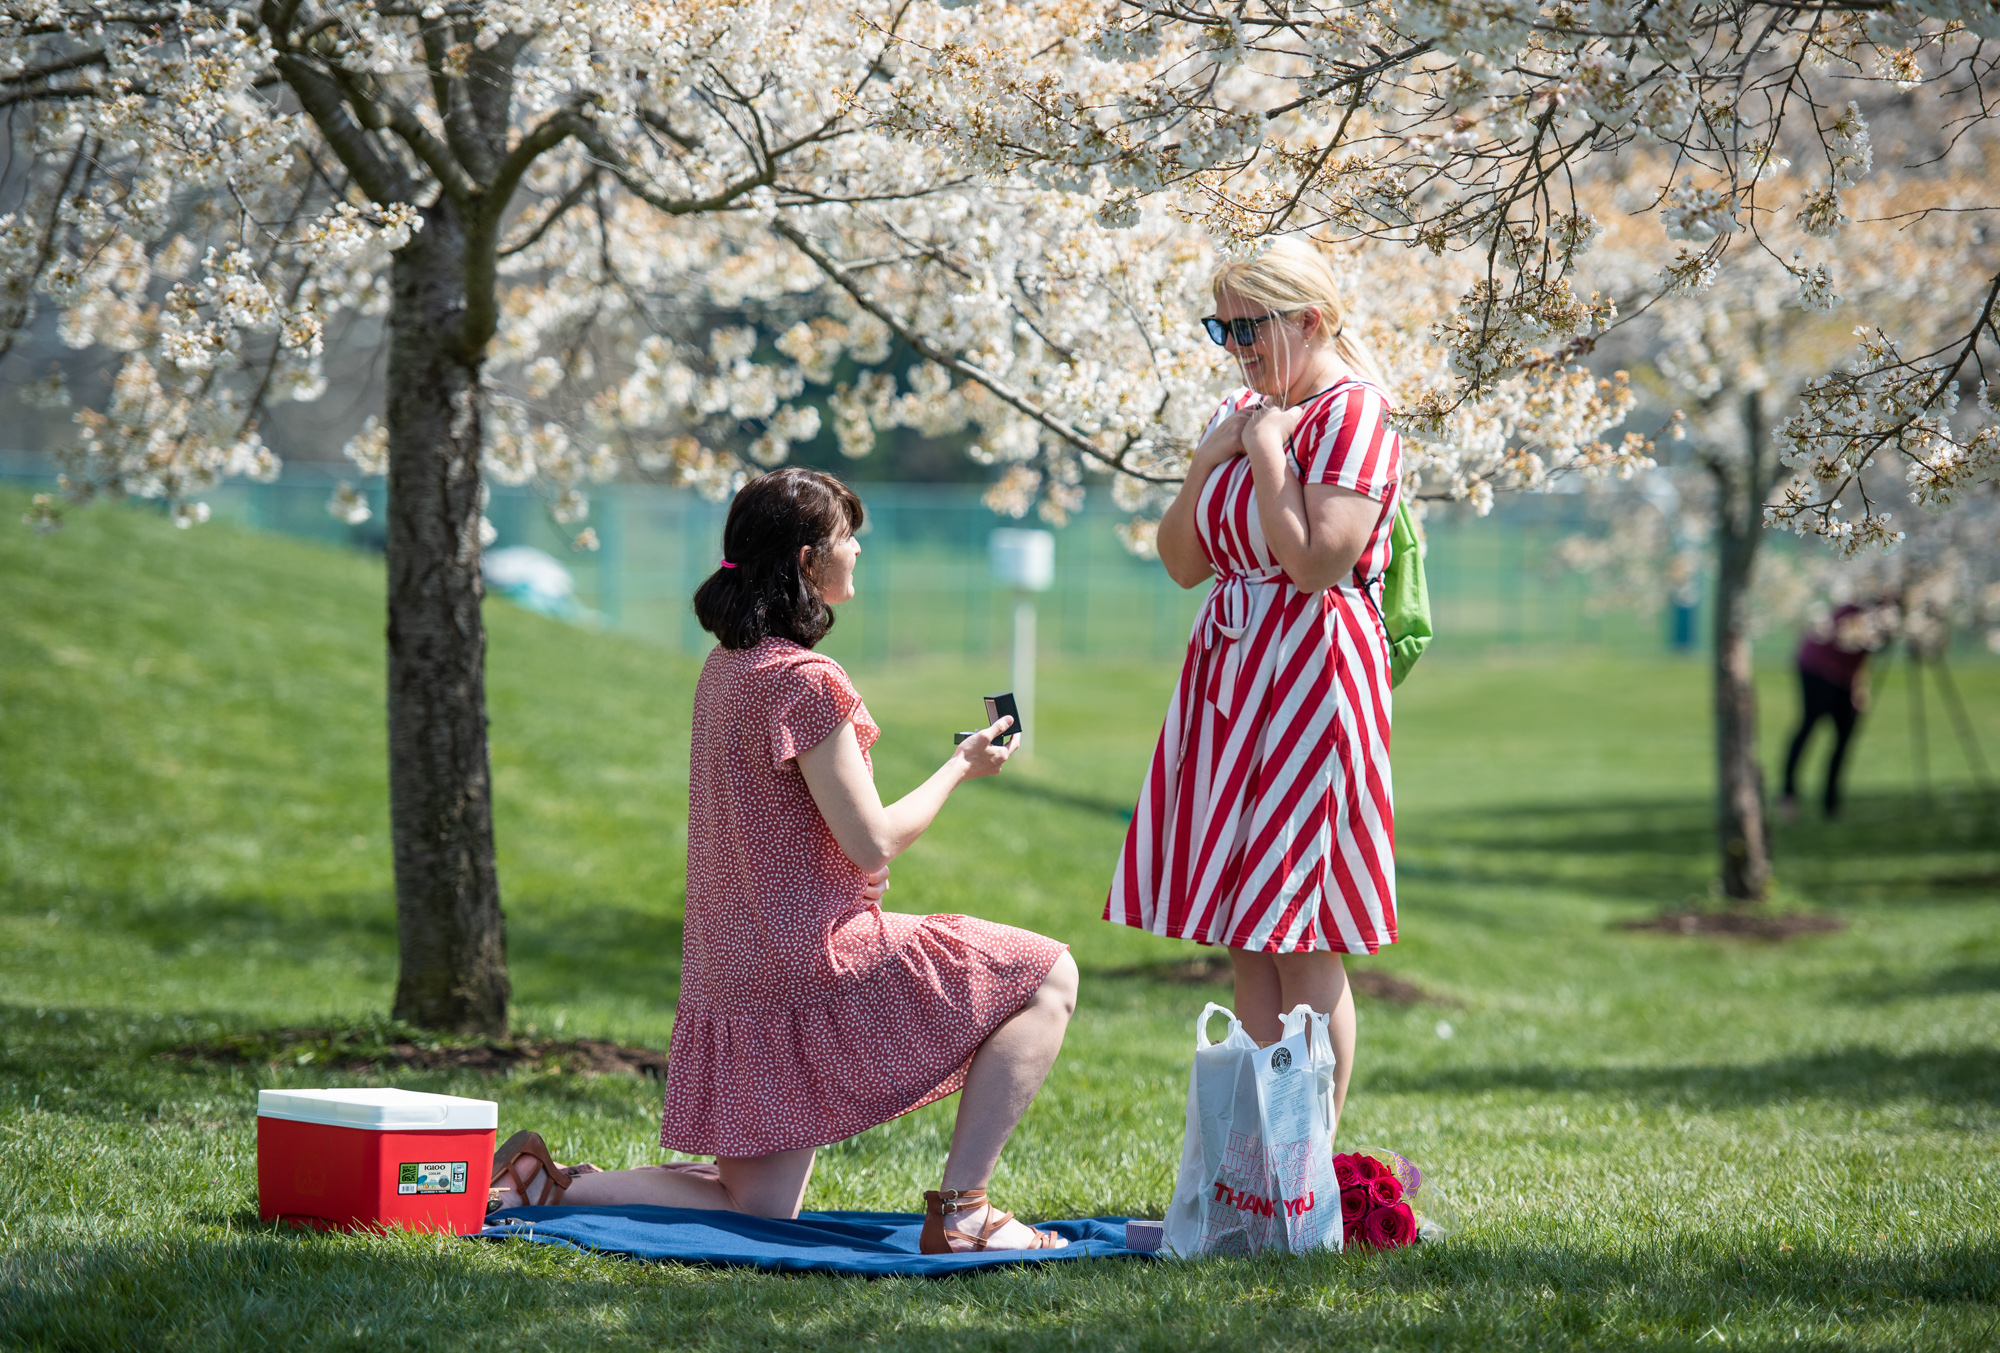 A couple enjoys a picnic on the grass beneath blooming Cherry Blossom trees